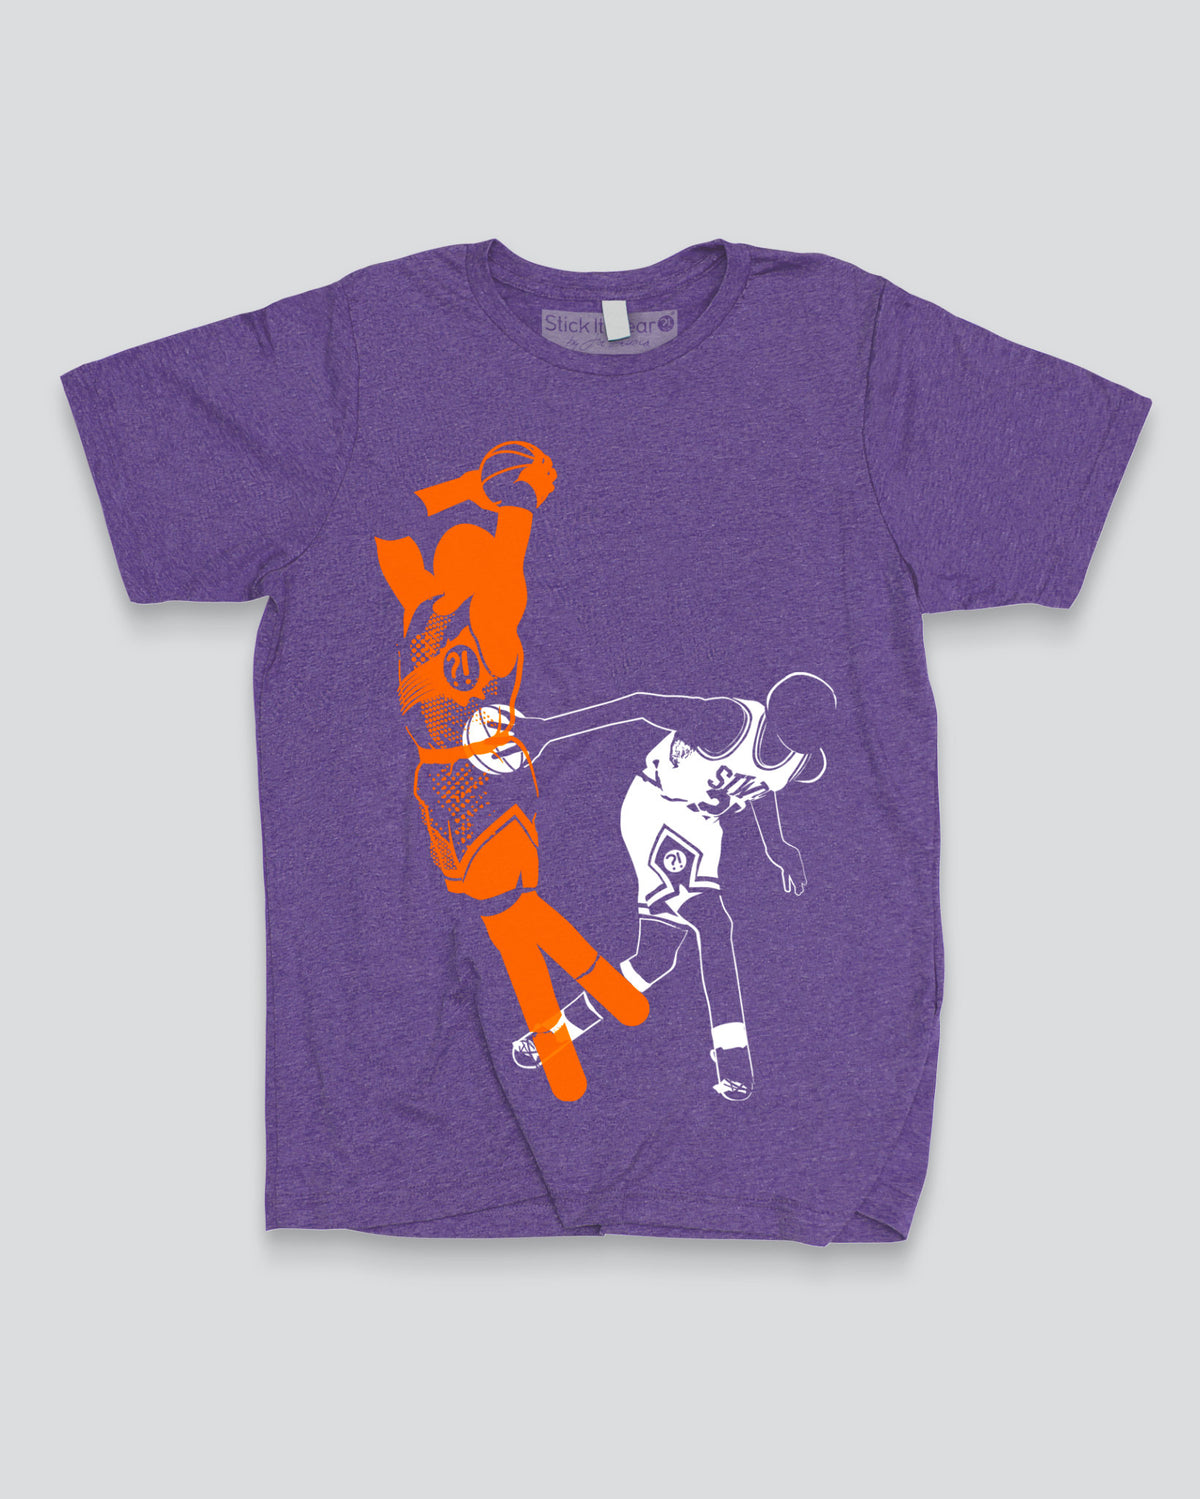 A SPECTACULAR MOVE 03 Basketball Stance T-Shirt